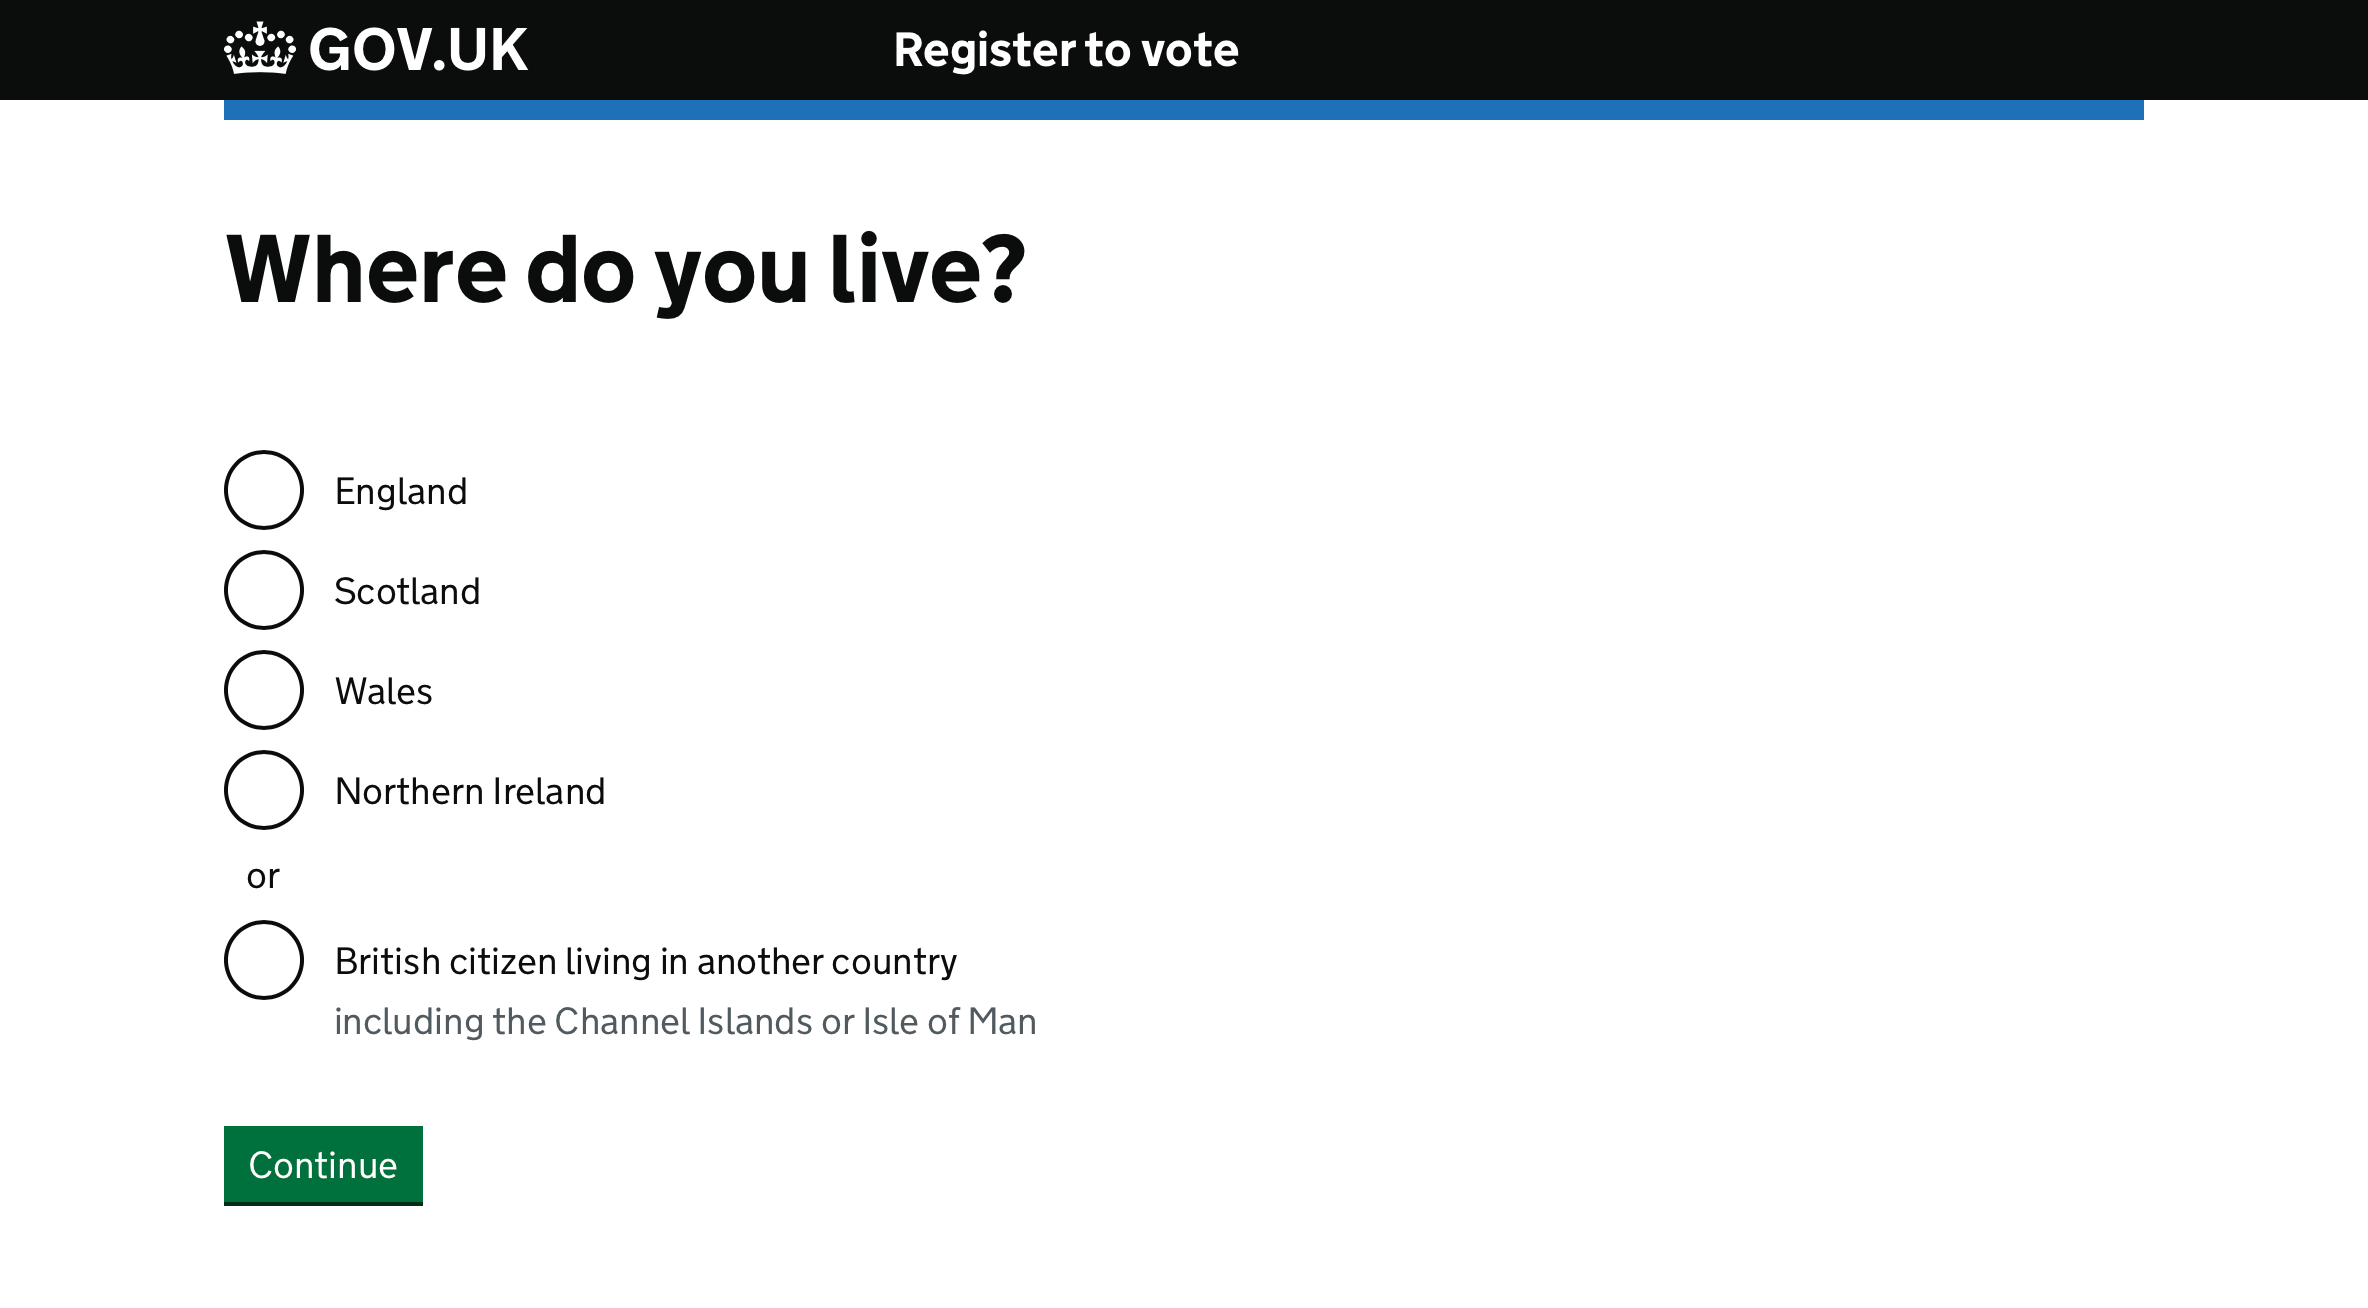 Screenshot. Where do you live? Radios: England, Scotland, Wales, Northern Ireland or British citizen living in another country including the Channel Islands or Isle of Man. Button Continue